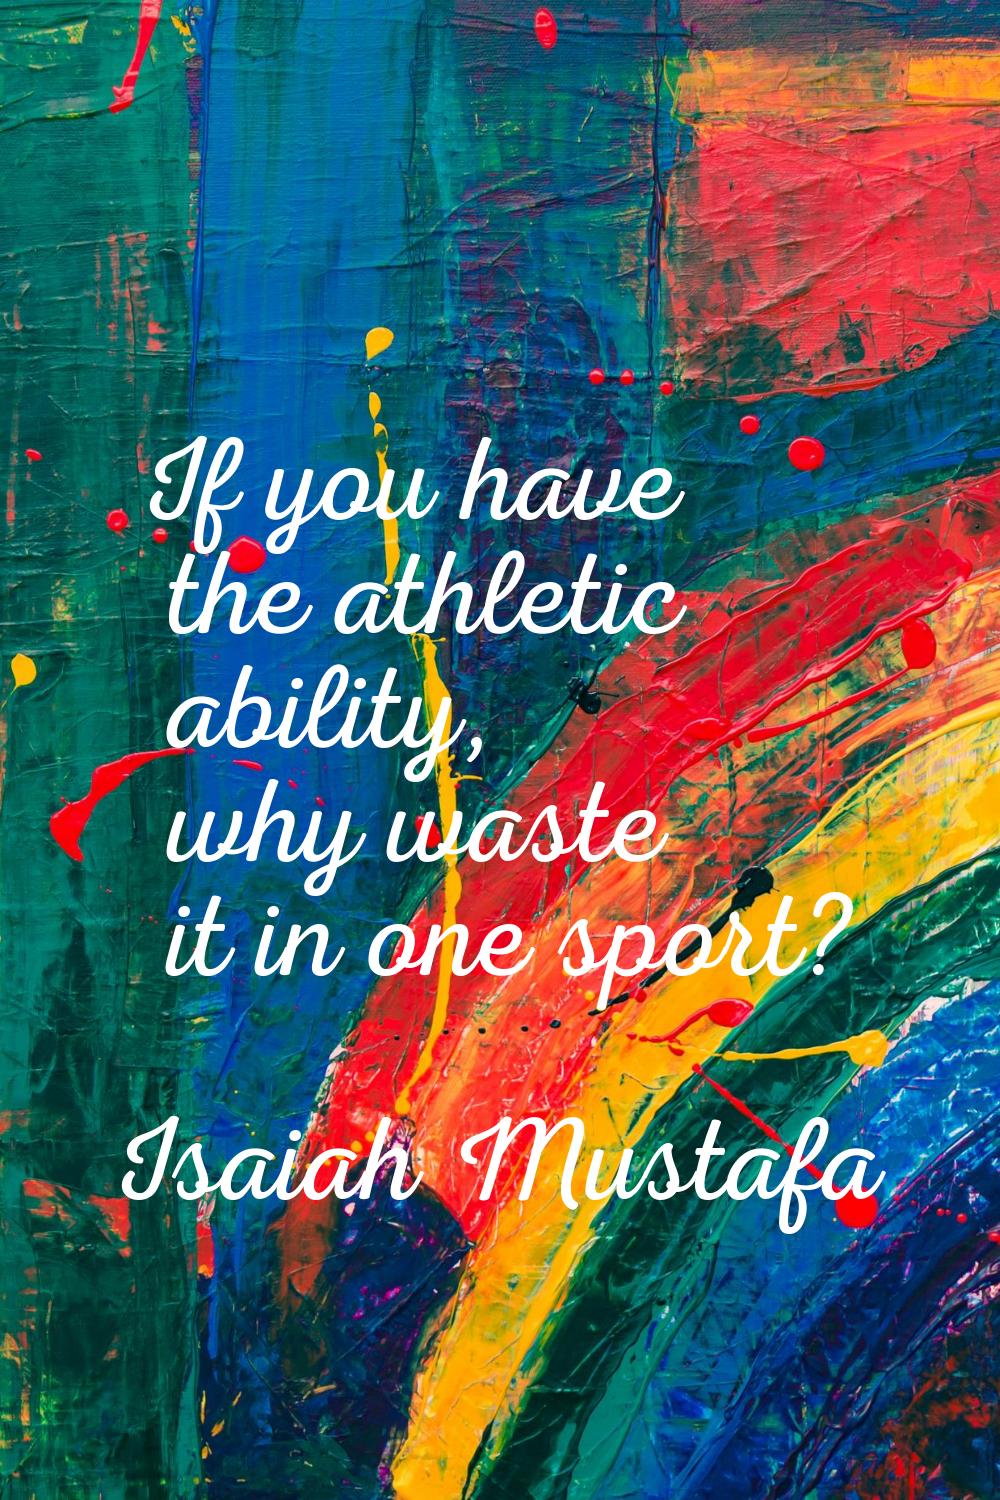 If you have the athletic ability, why waste it in one sport?